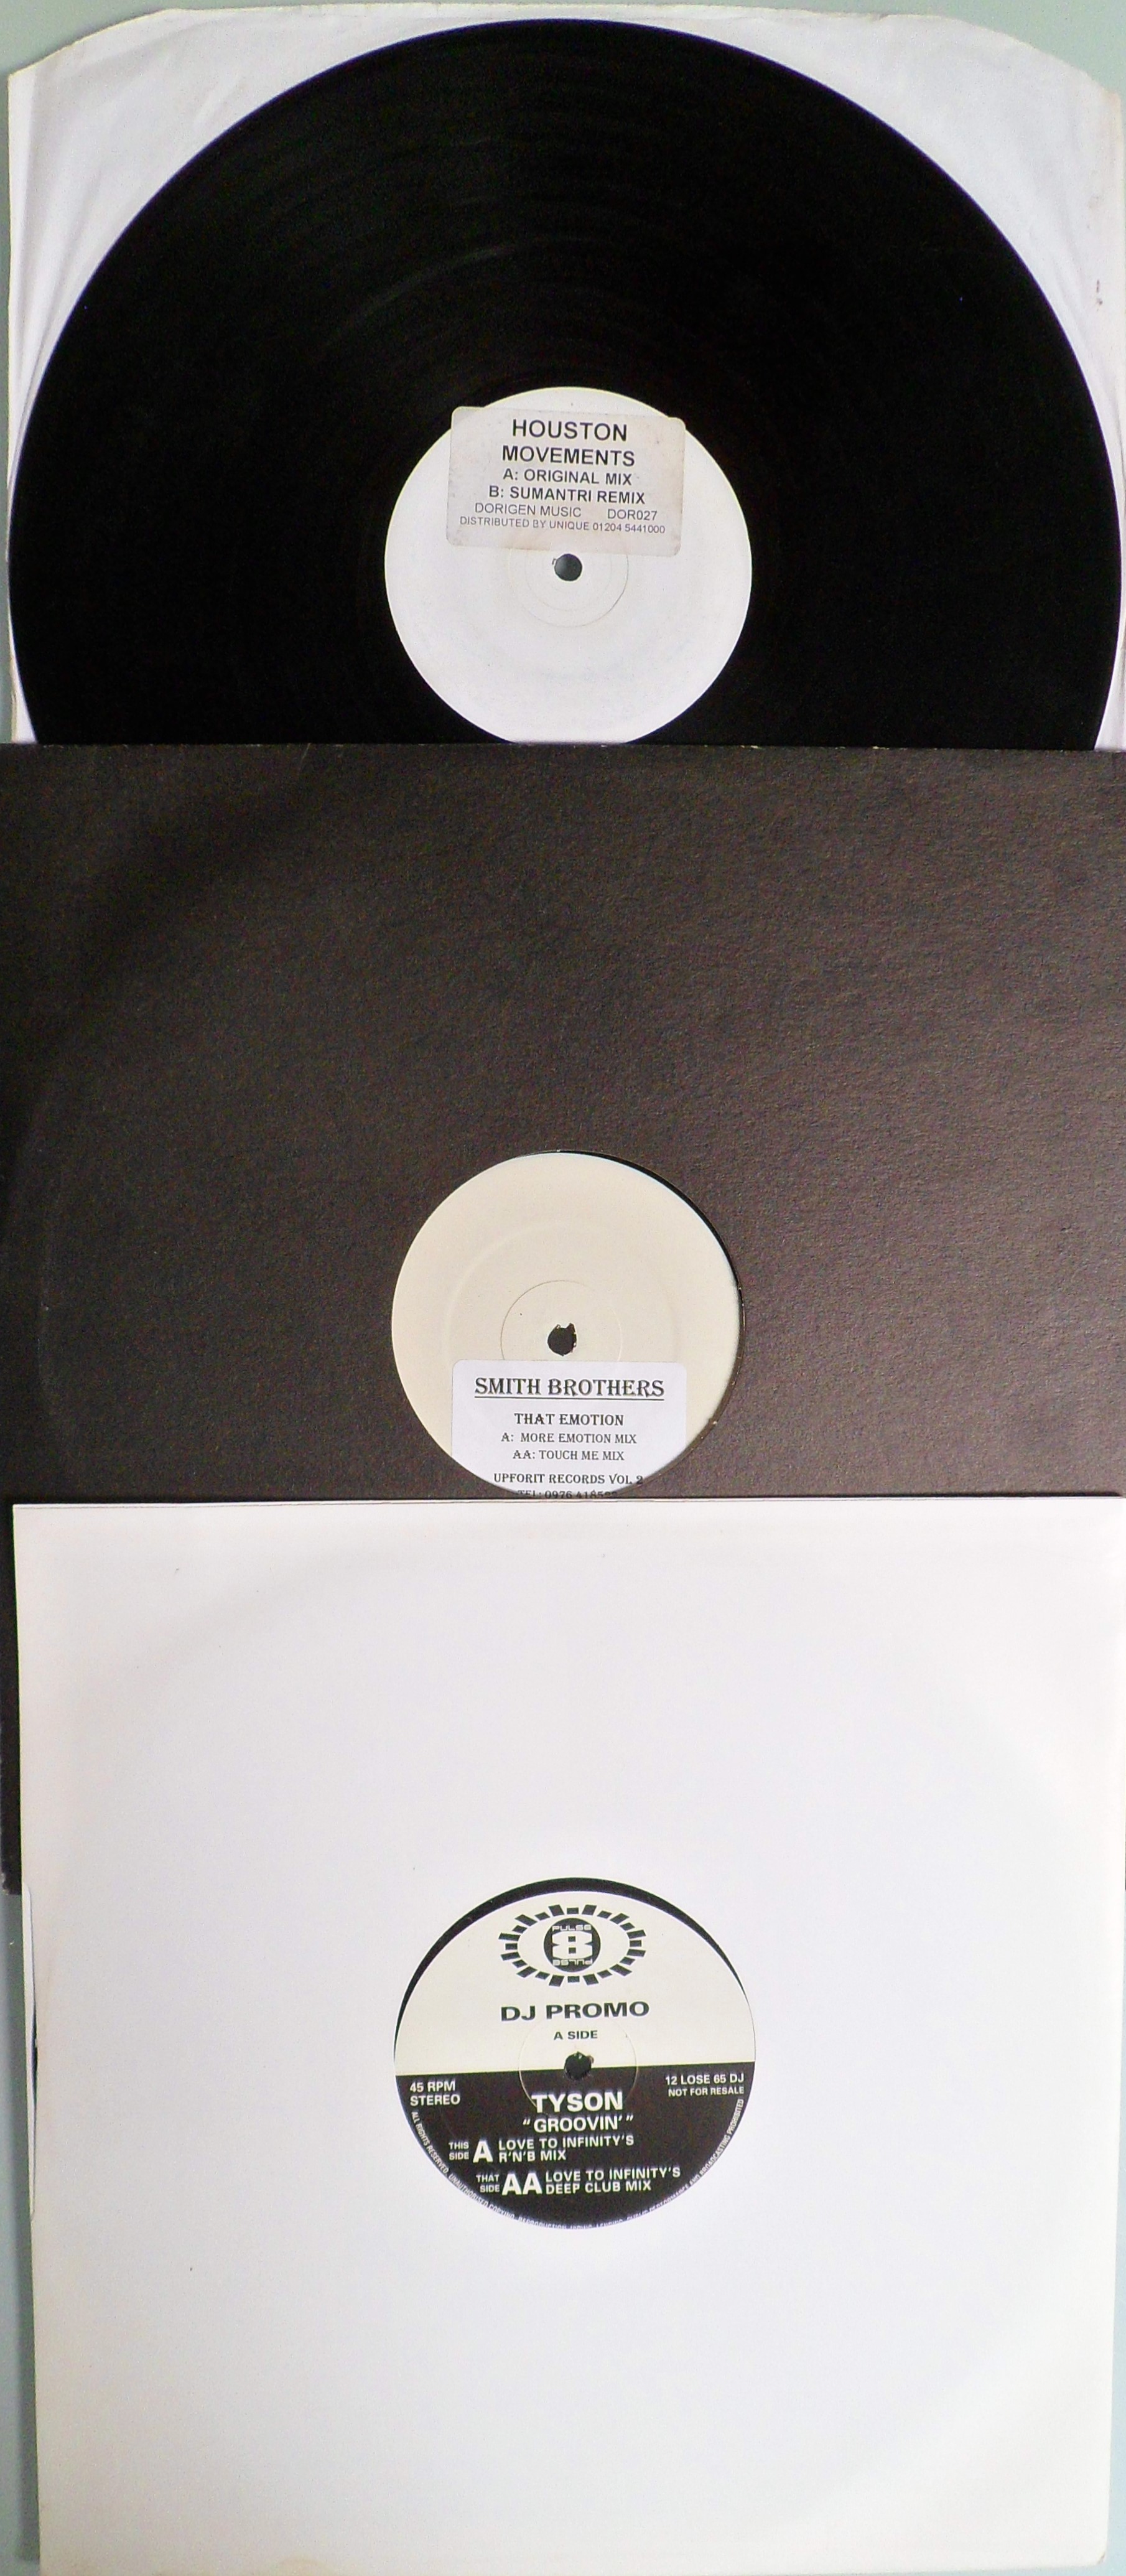 11 x Promo - Limited edition Vinyl Records. - Image 2 of 4